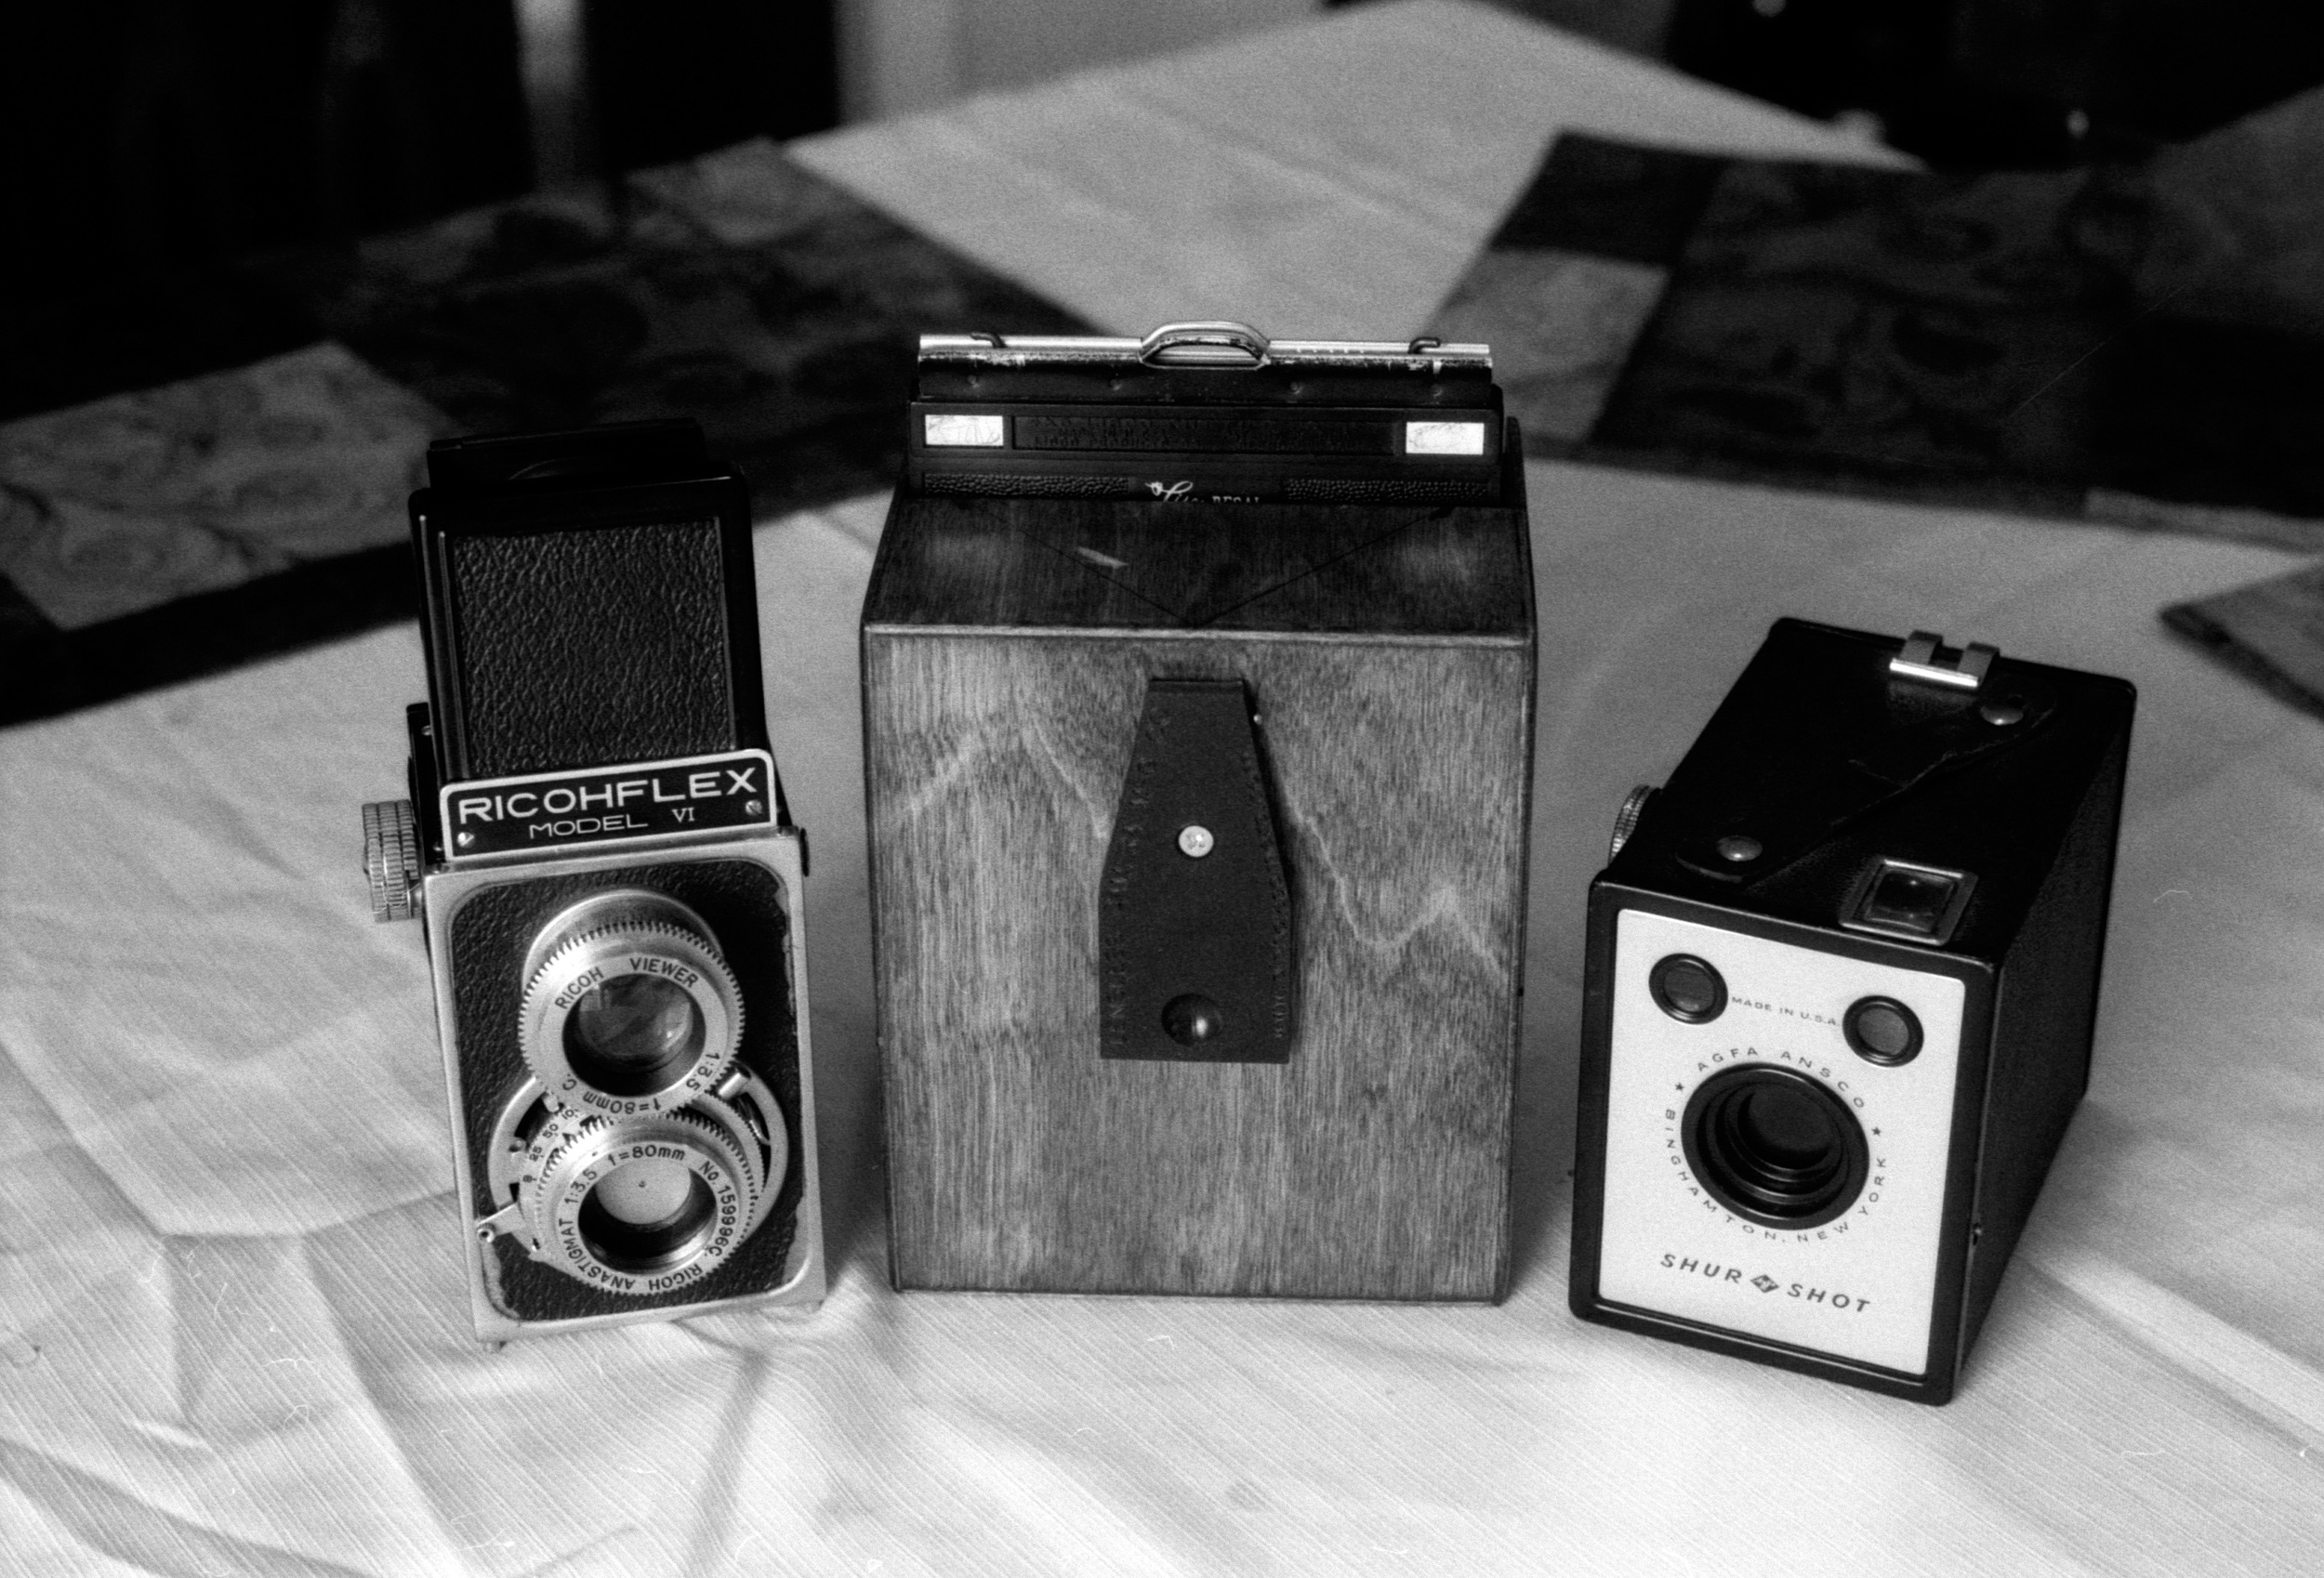 In the middle isthe 4x5 camera used to make my photos, Lensless Camera co. 4x5 pinhole.